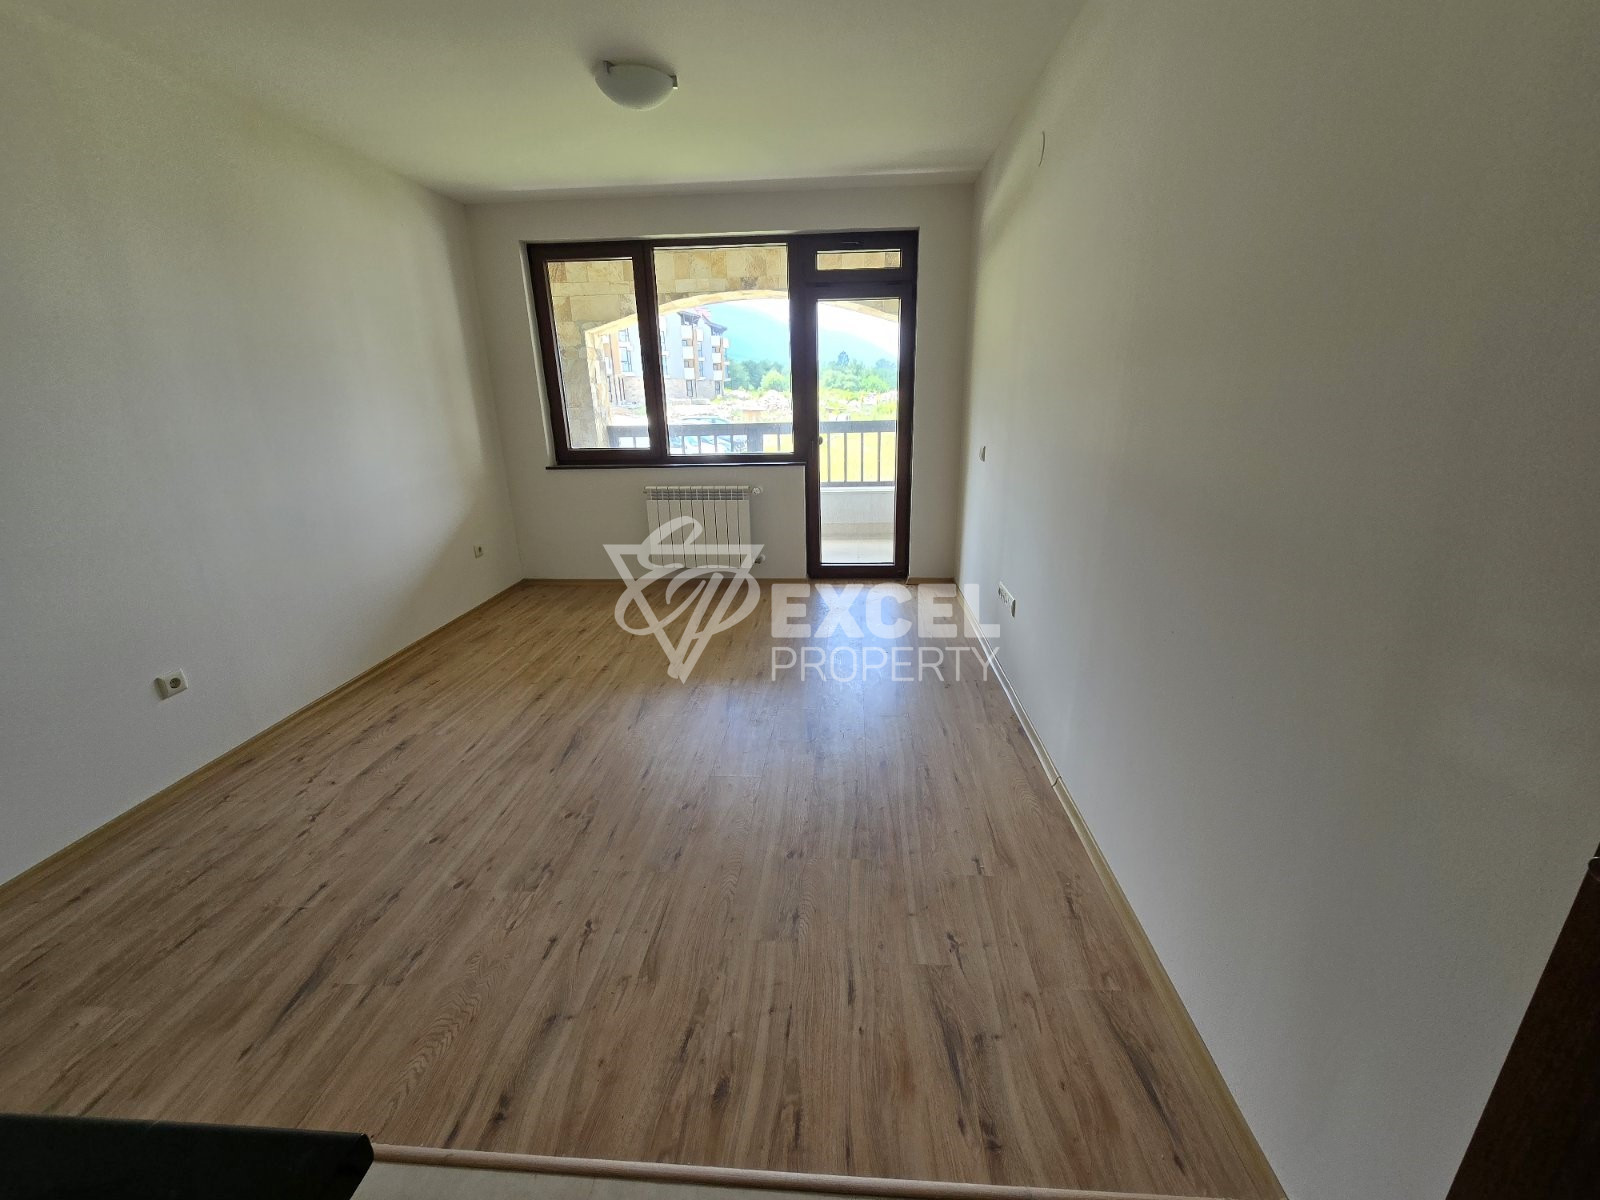 Spacious studio for sale in a residential building 3 minutes’ walk from the ski lift, Bansko